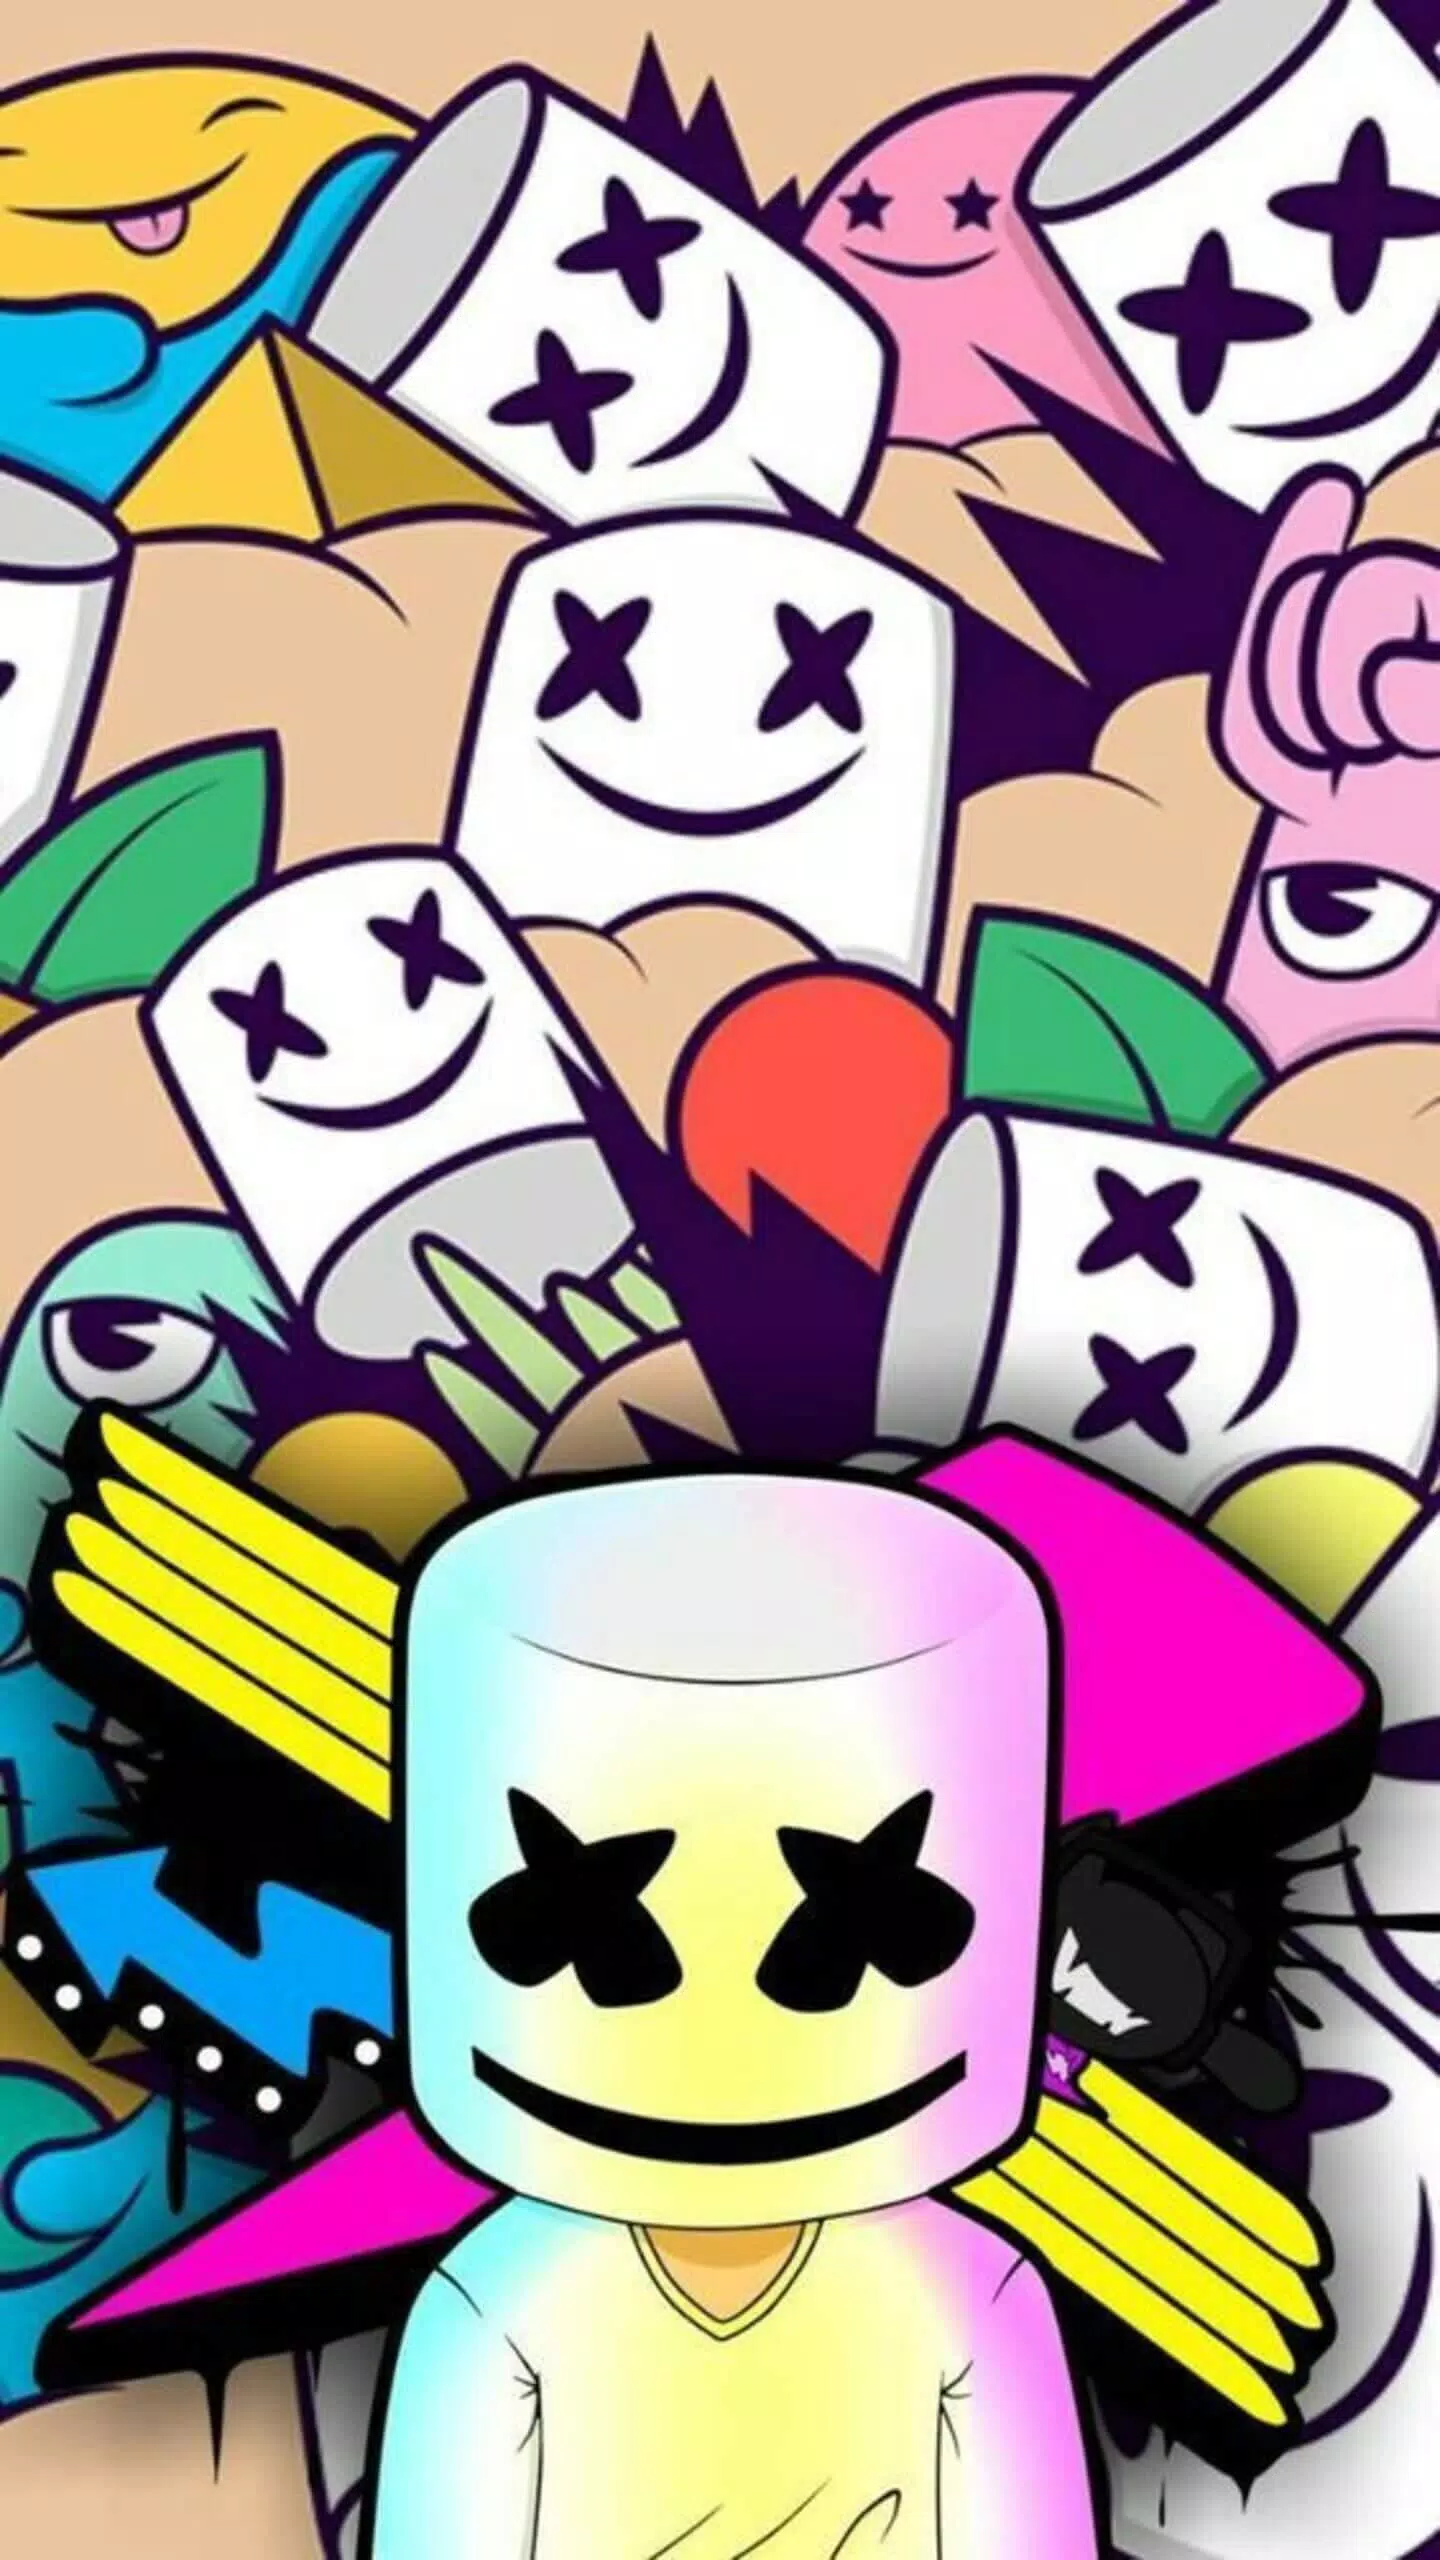 The image of a cartoon character with many other characters - Marshmello